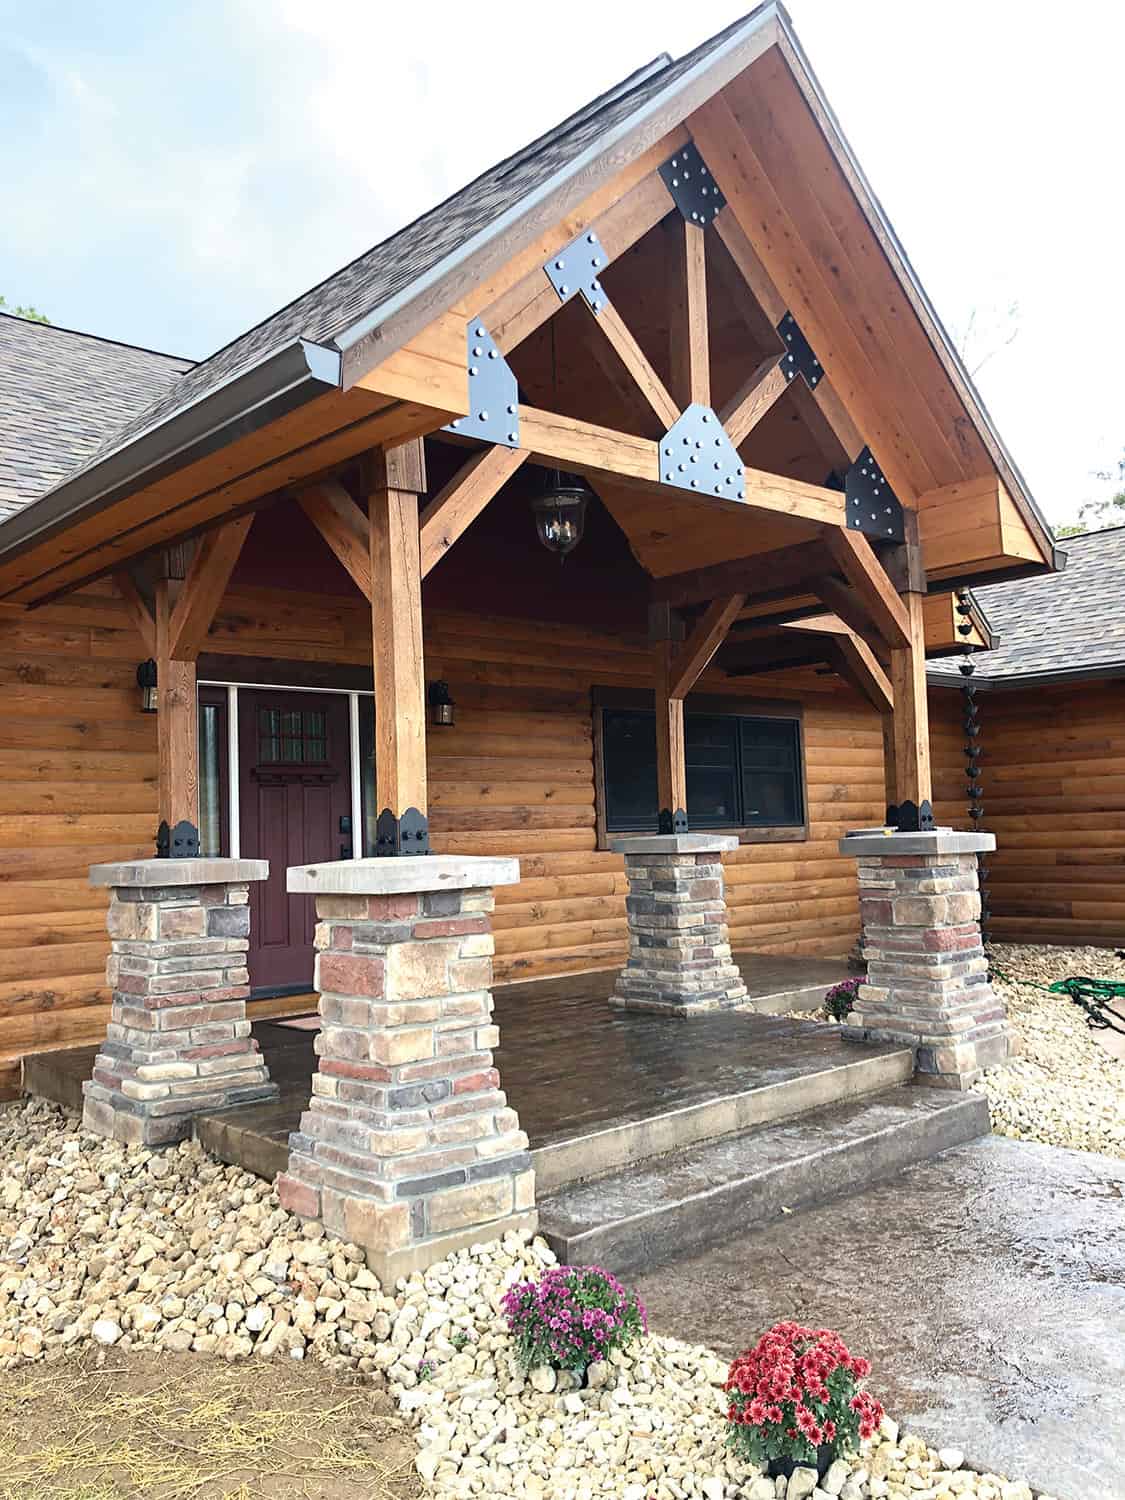 Gastineau Log Homes Updates Consumer Tools For Viewing Home Plans 2